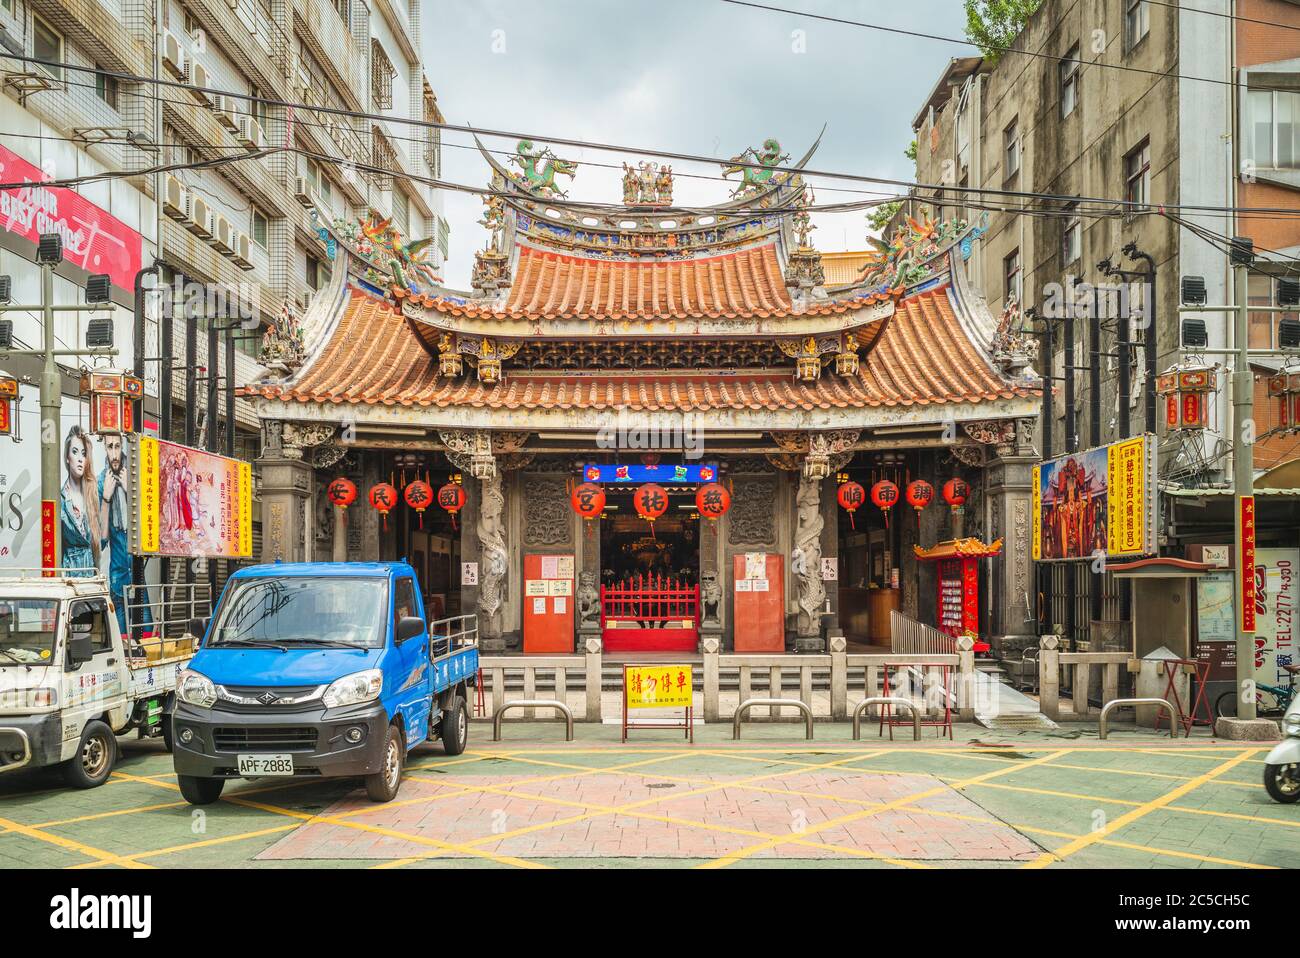 July 2nd, 2020: Ciyou Temple, also known as Xinzhuang mazu temple, is the oldest temple nearly 300 years and a religious center in Xinzhuang district Stock Photo